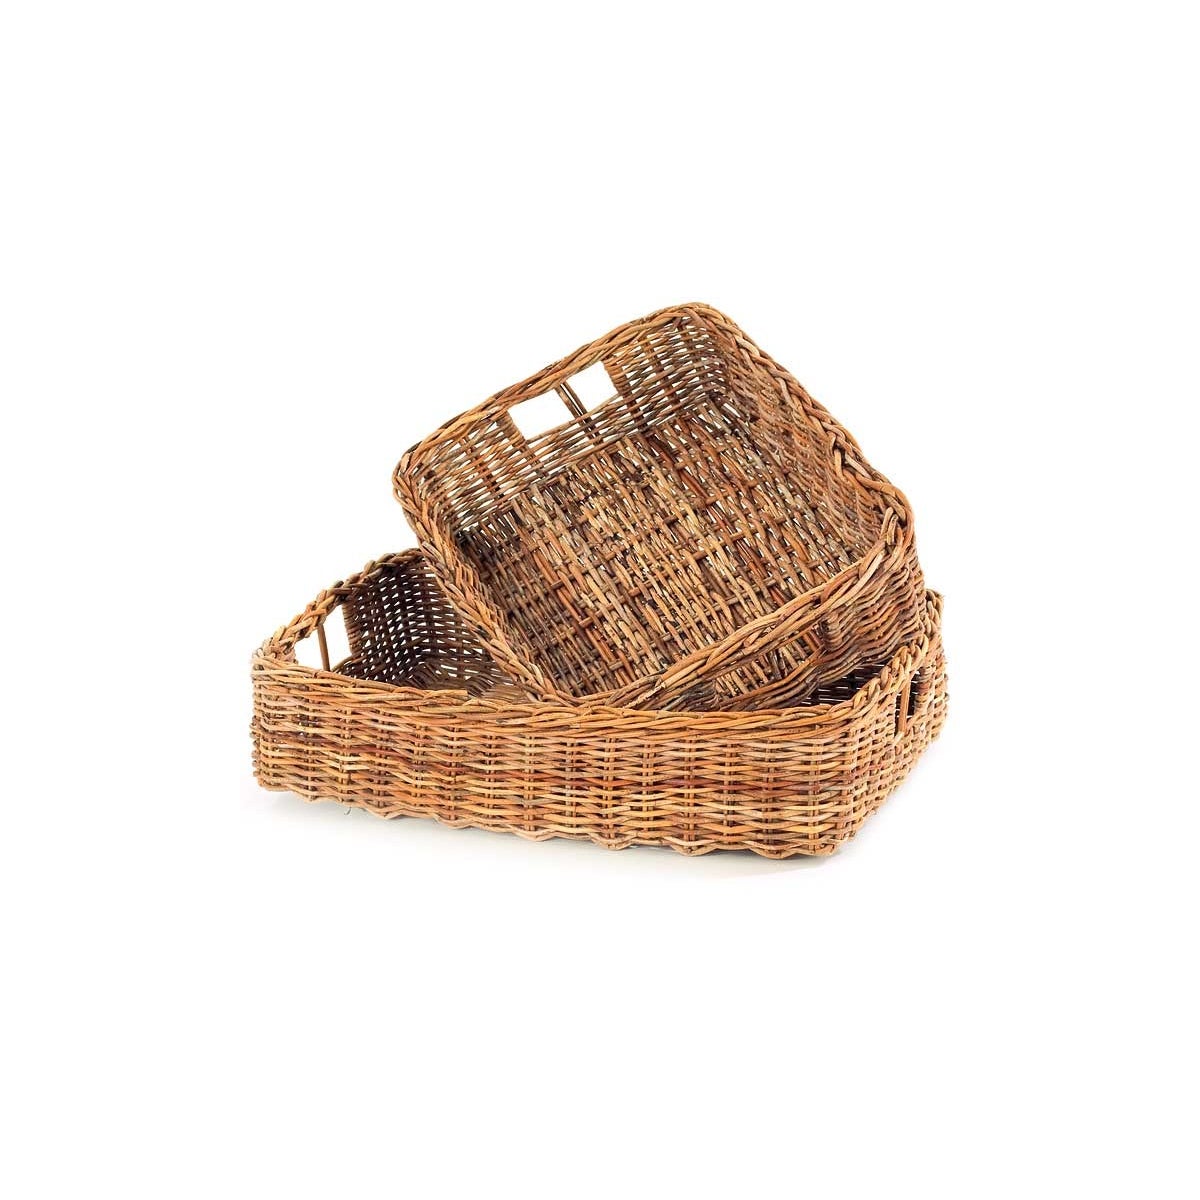 French Country Storing Basket Set